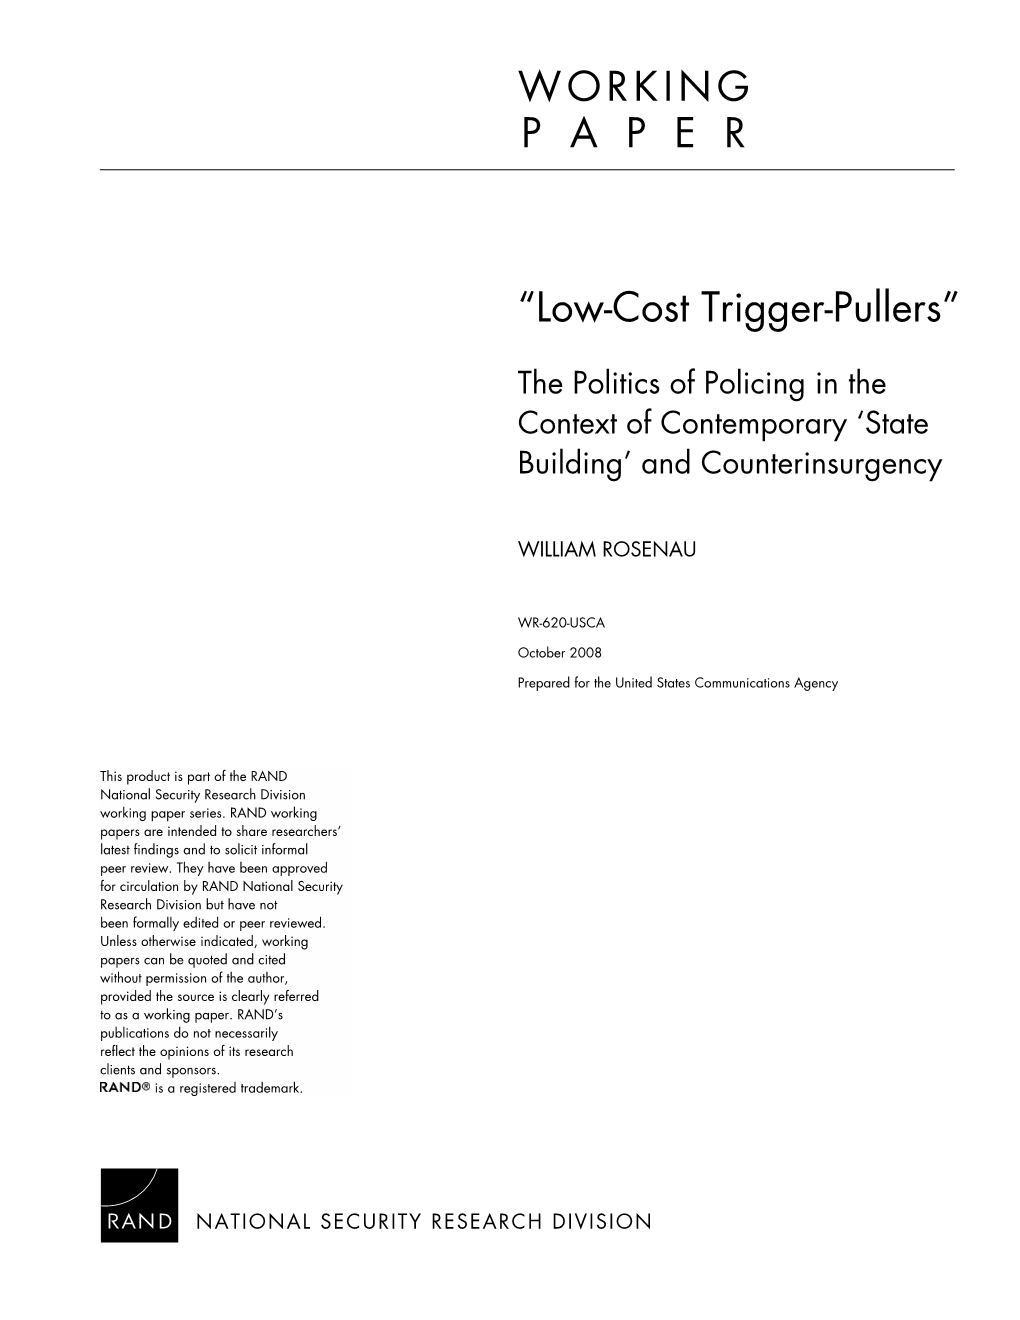 "Low-Cost Trigger-Pullers": the Politics of Policing in the Context Of